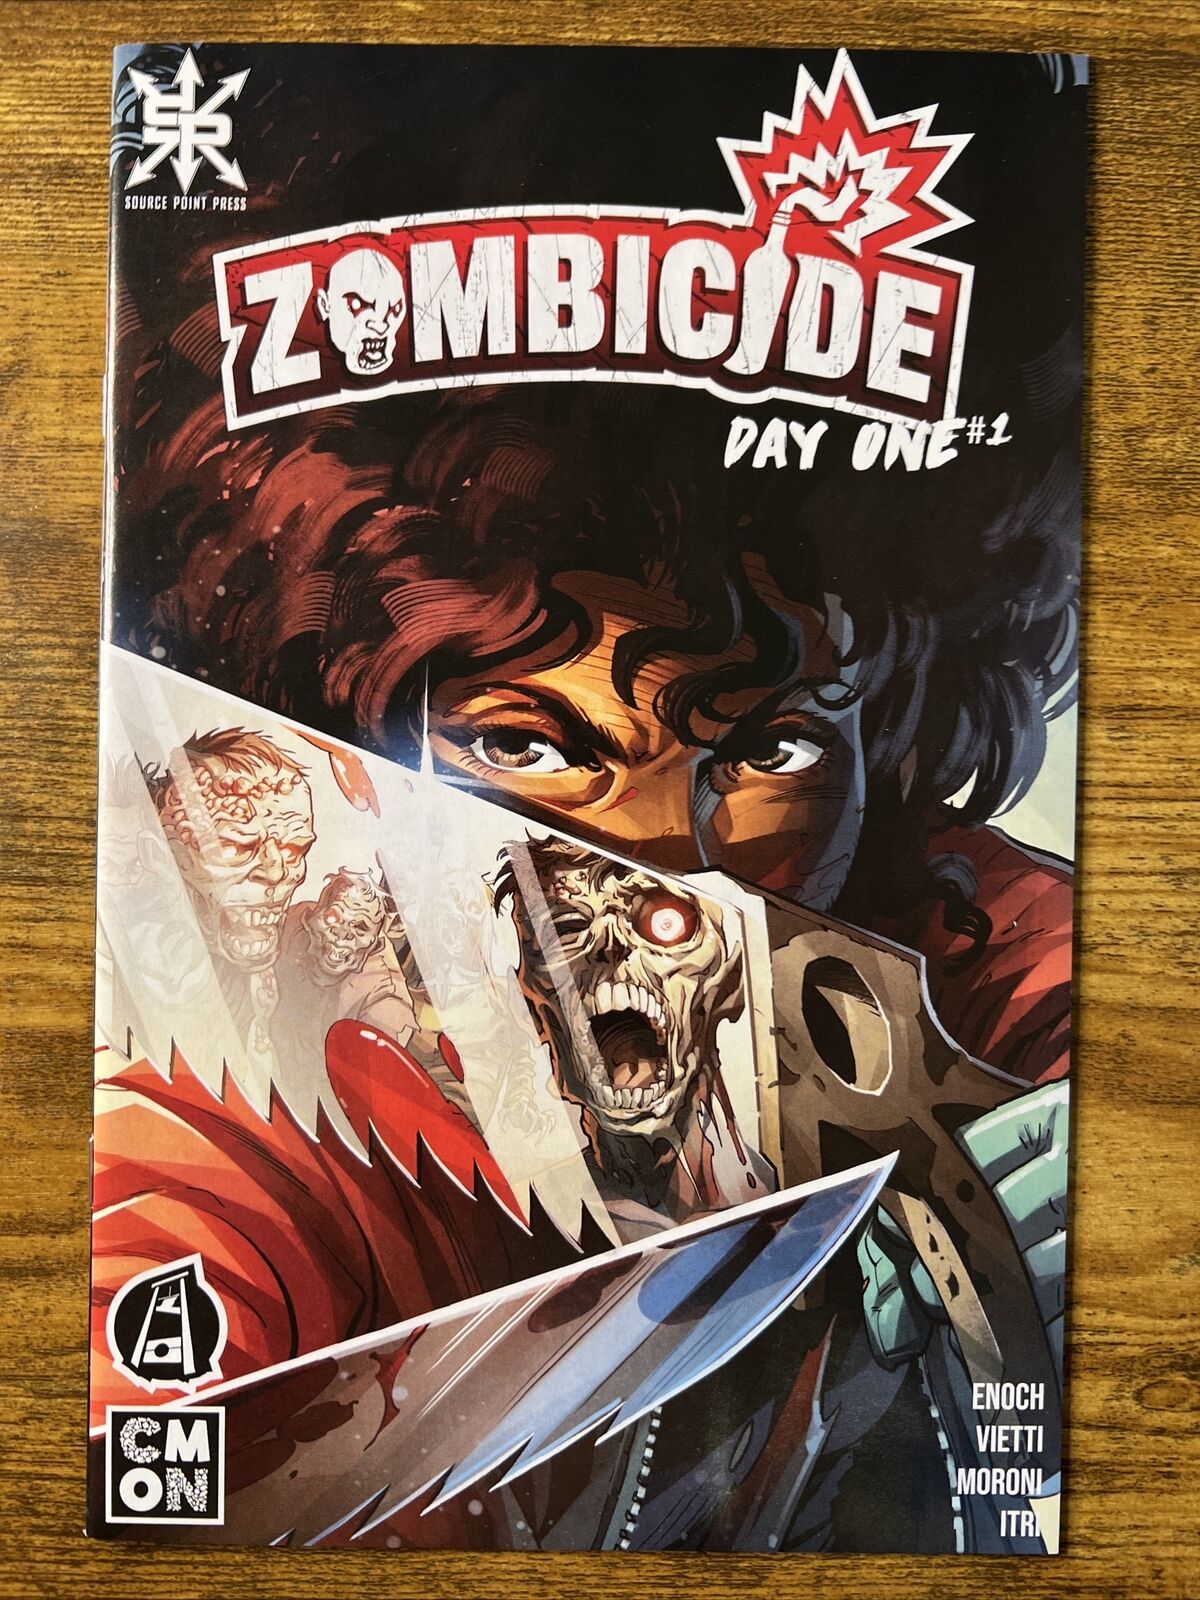 ZOMBICIDE DAY ONE 1 NM/NM+ SOURCE POINT PRESS 2023